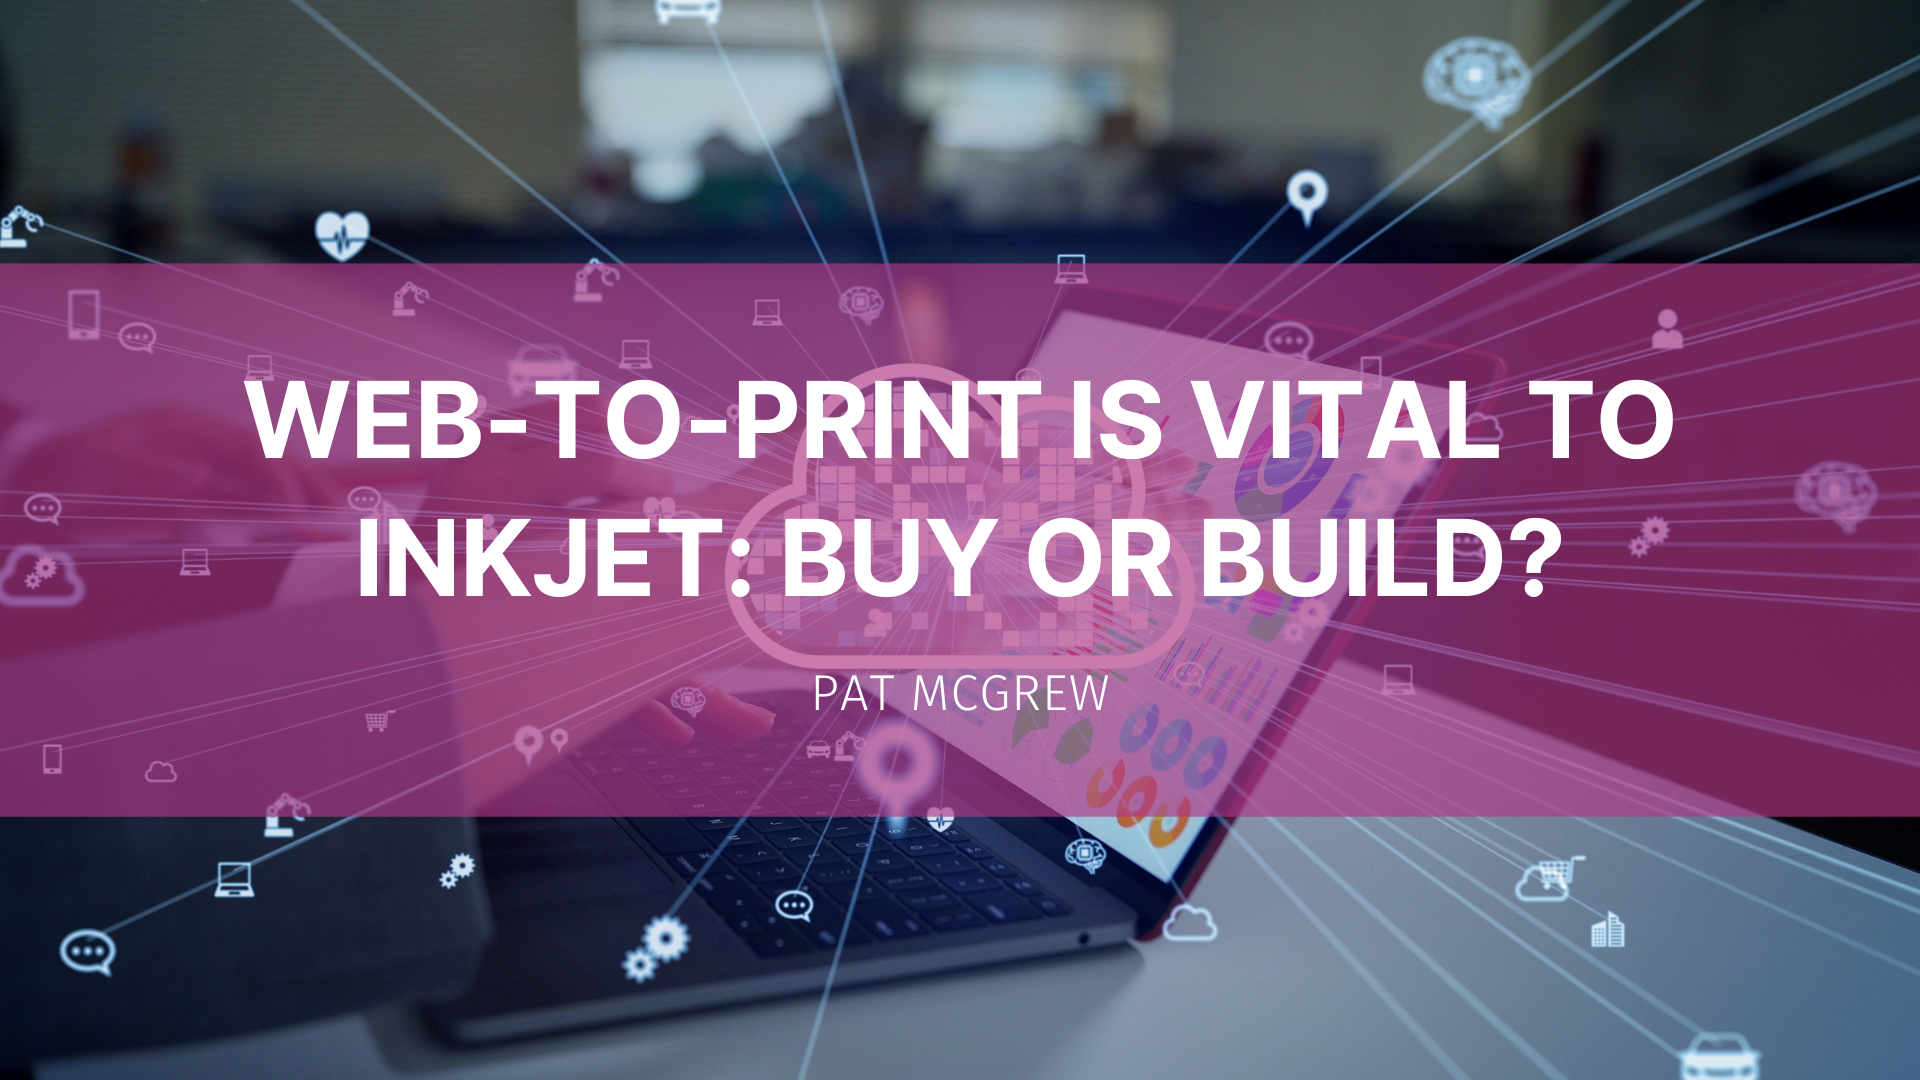 Featured image for “Web-to-print is vital to inkjet: buy or build?”